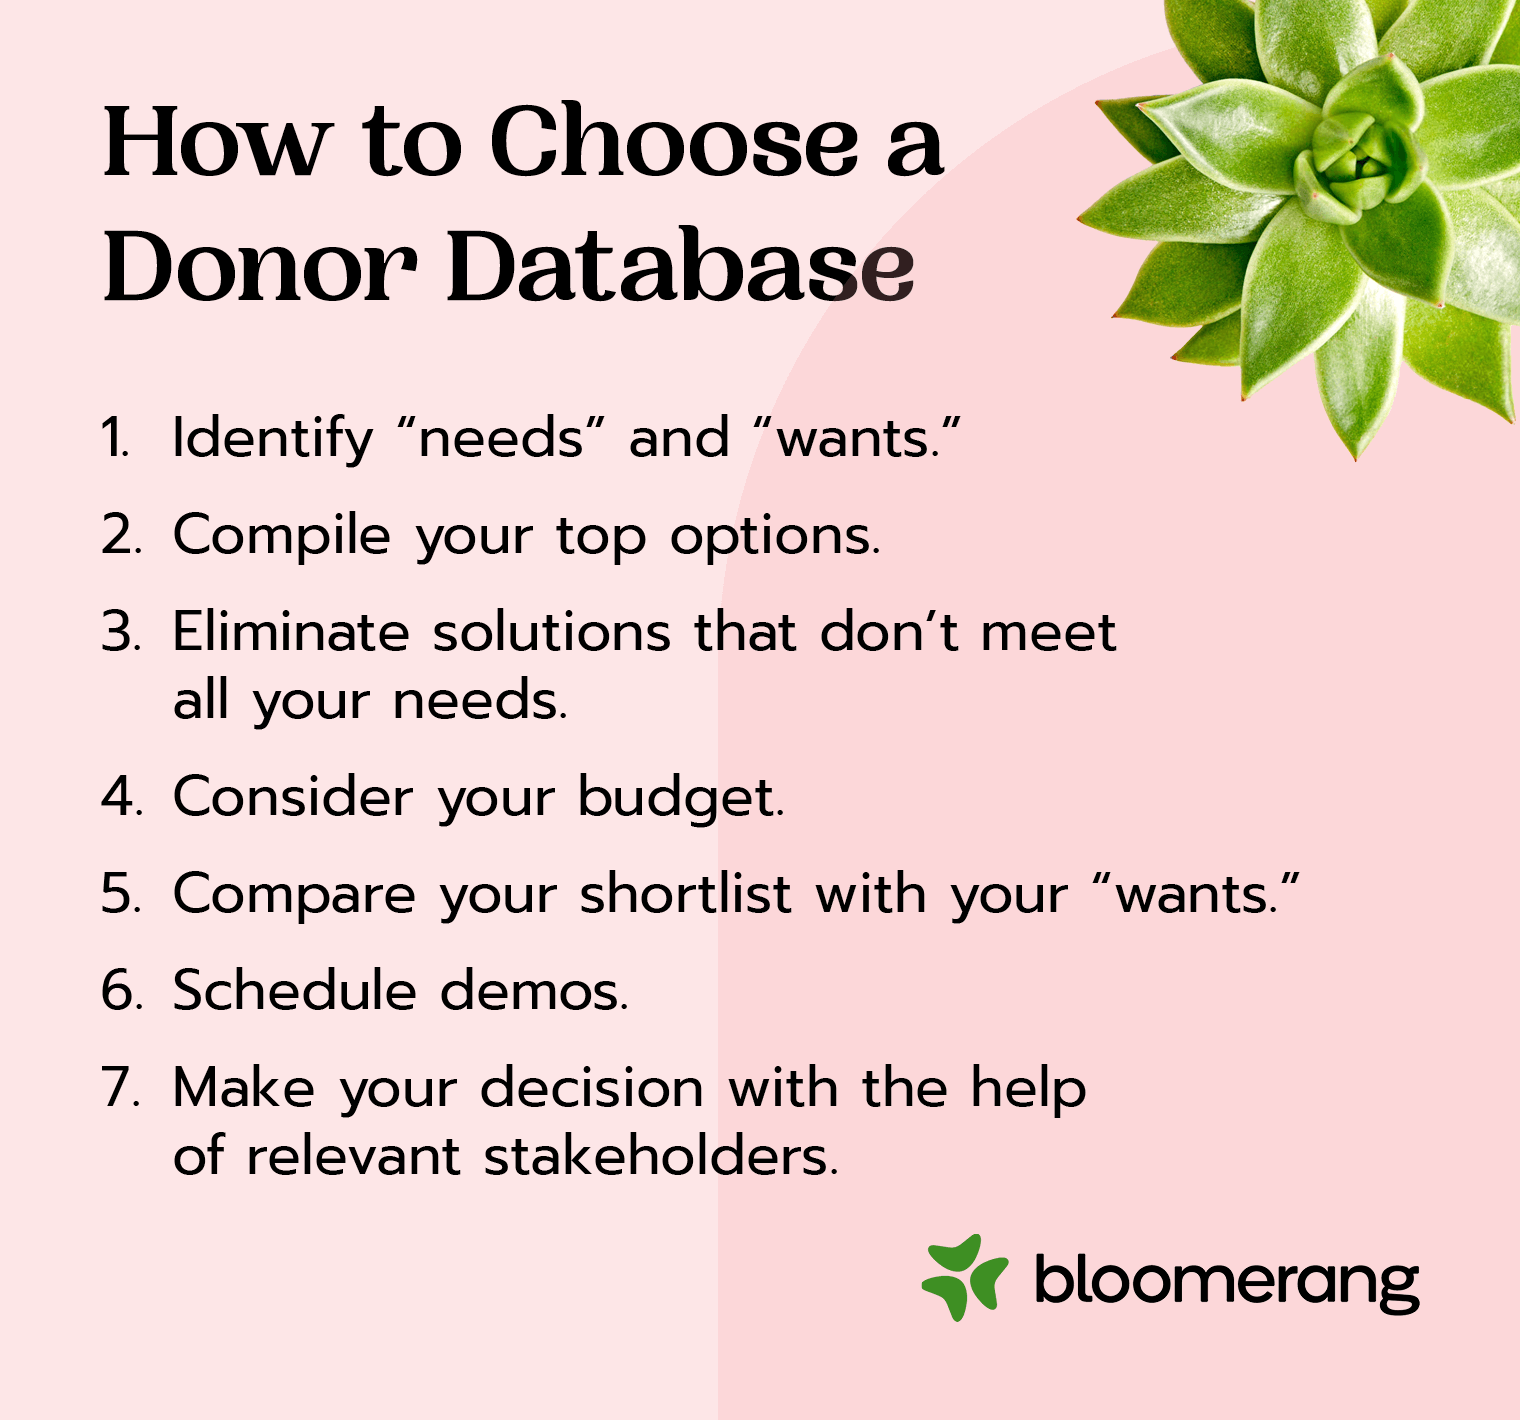 This image shows the steps you should follow to choose a donor database (explained in the list below). 